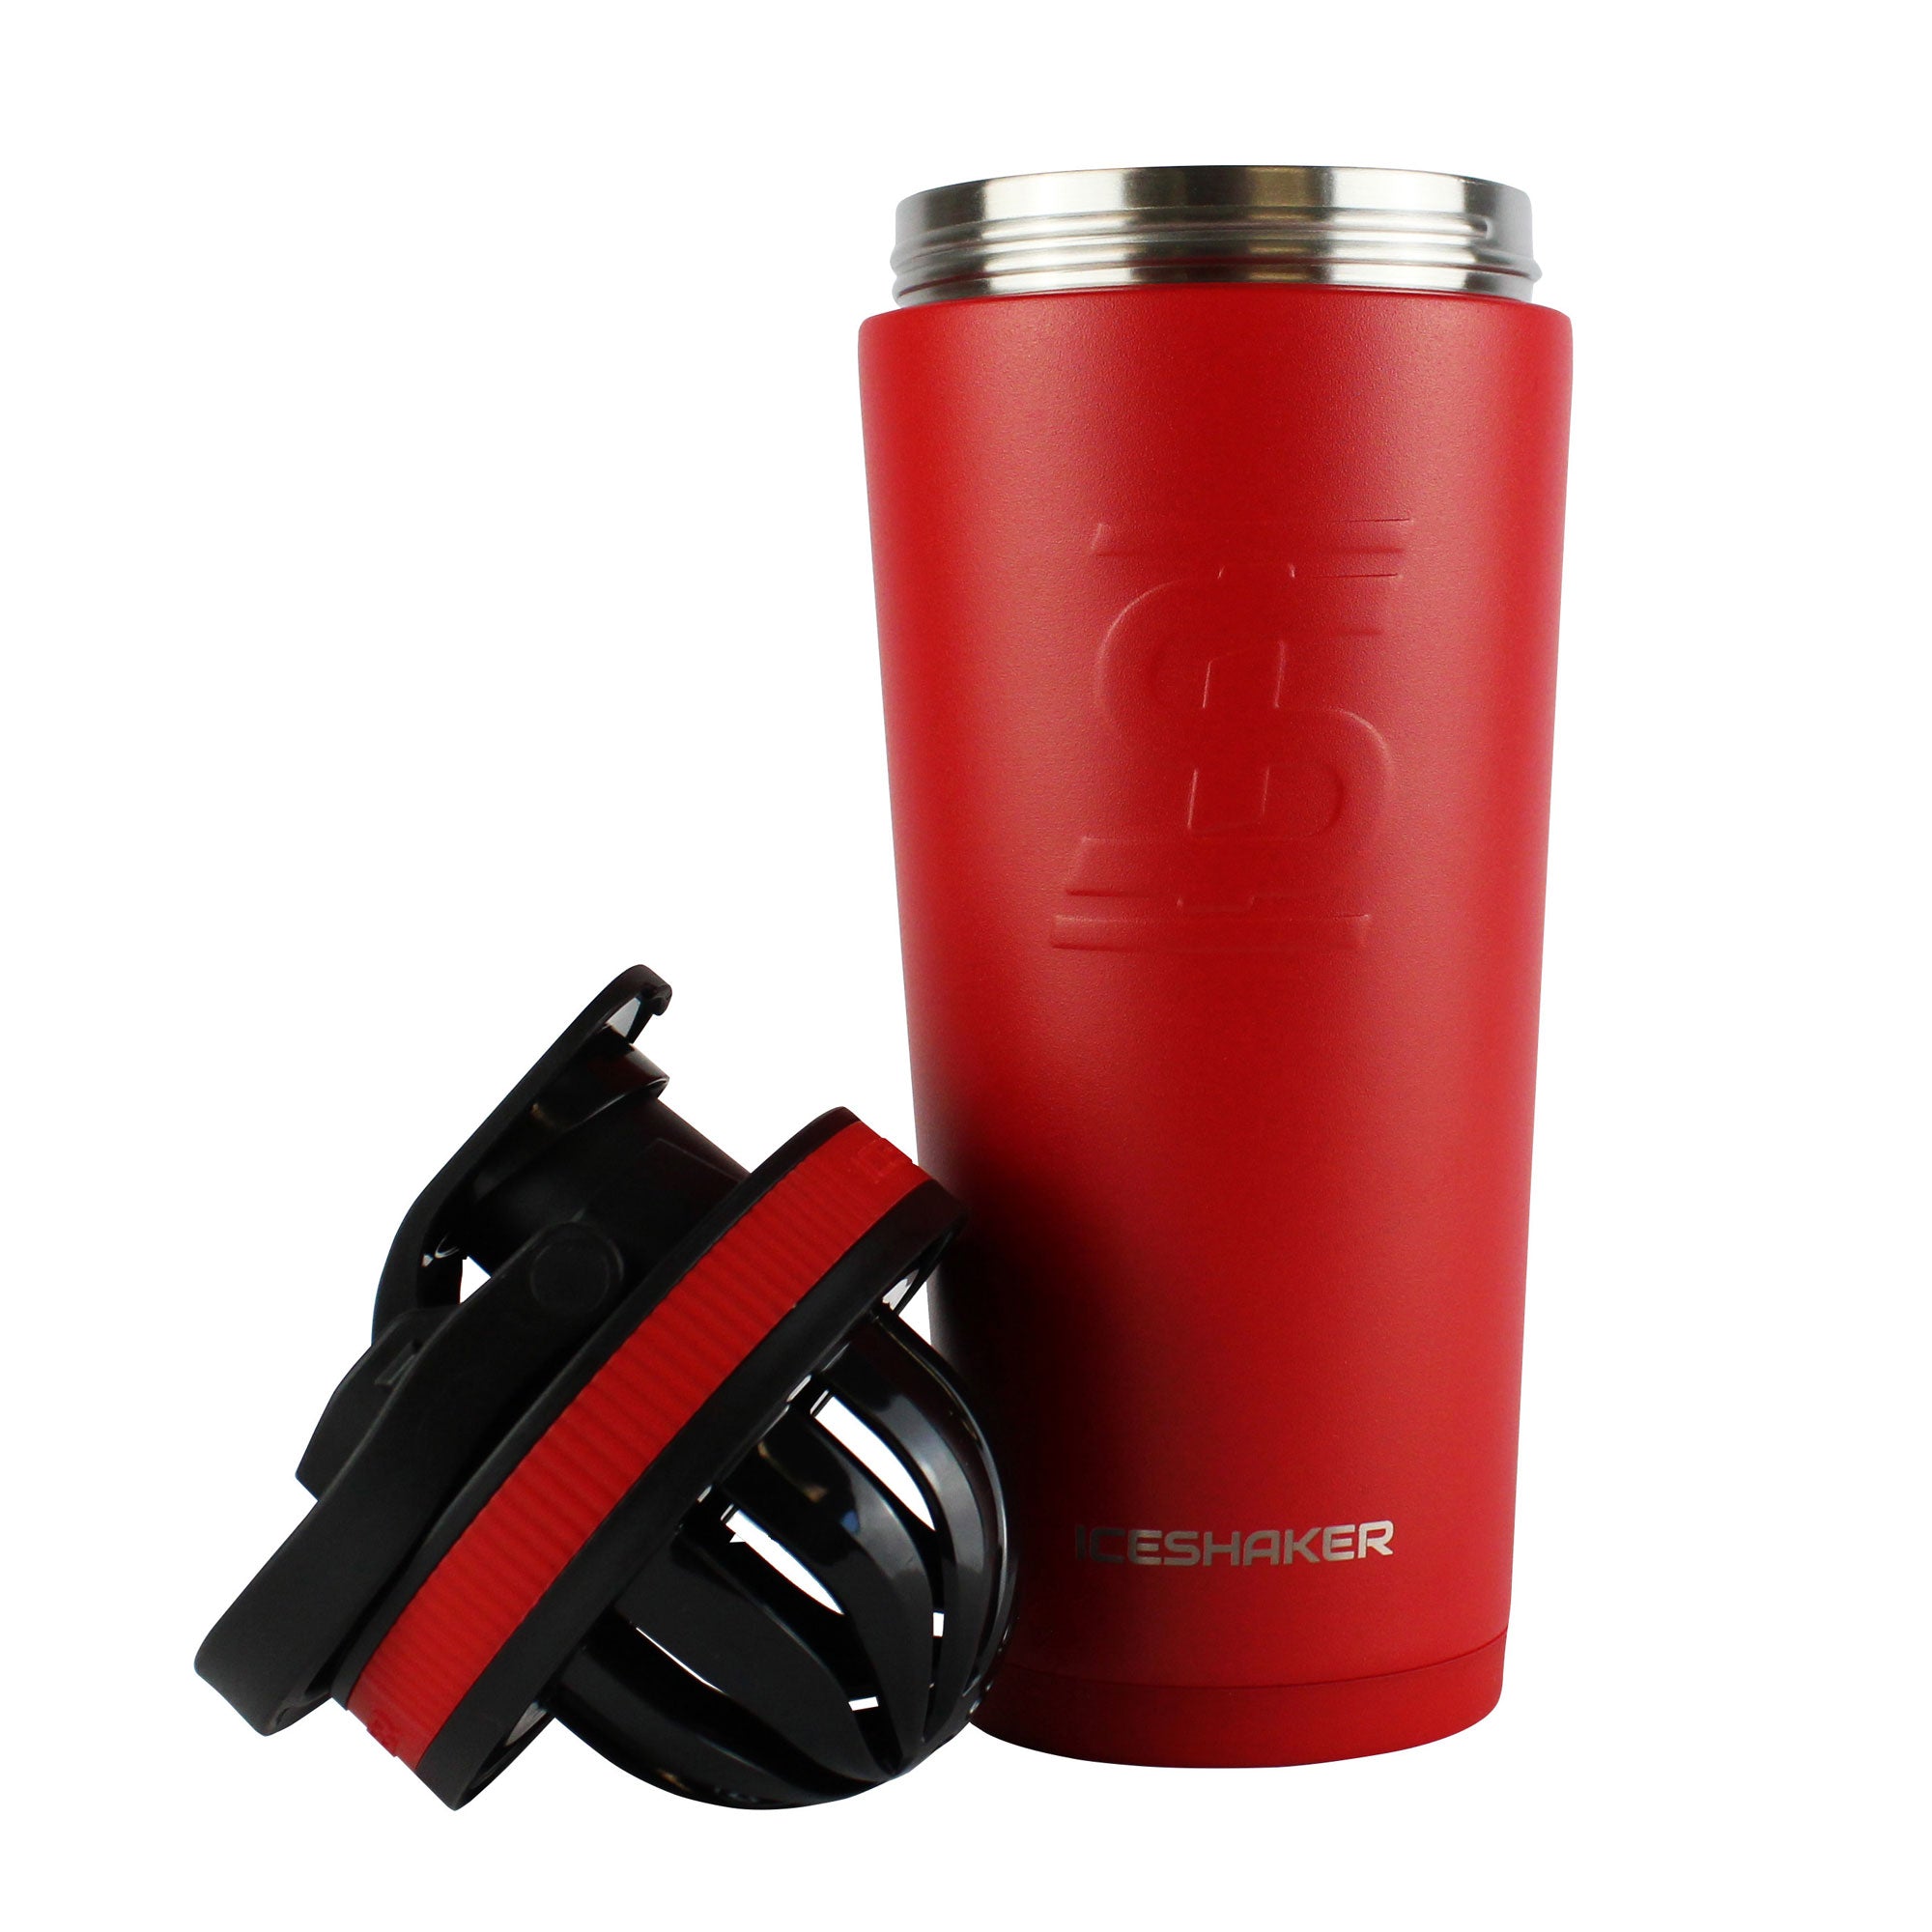 Gronk Signature Edition 26oz Ice Shaker - Red